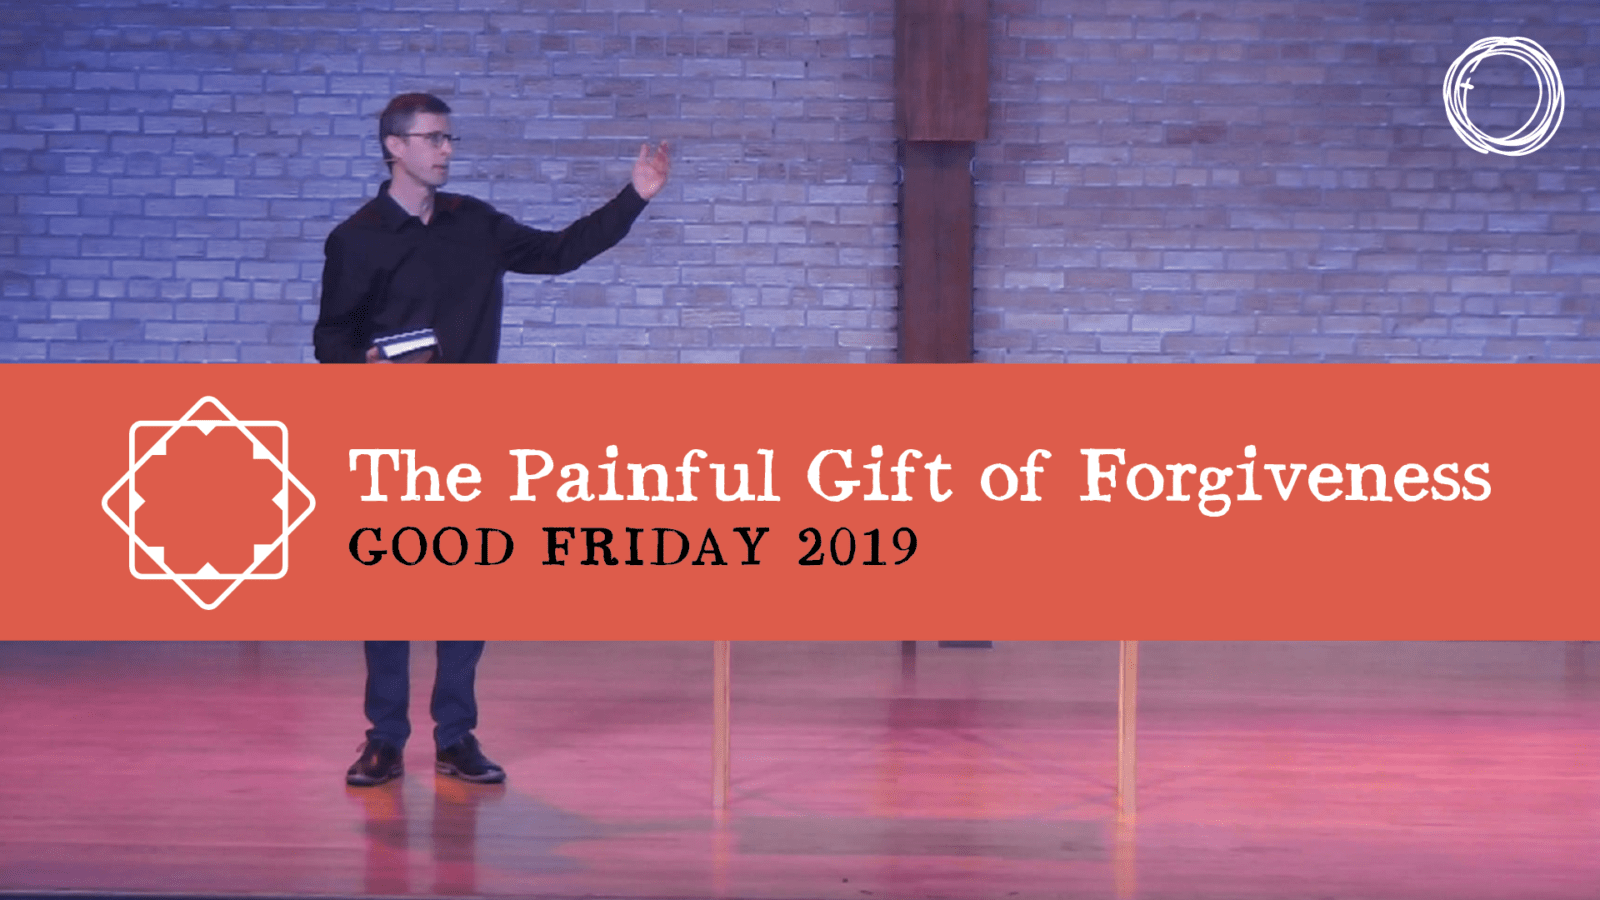 The Painful Gift of Forgiveness